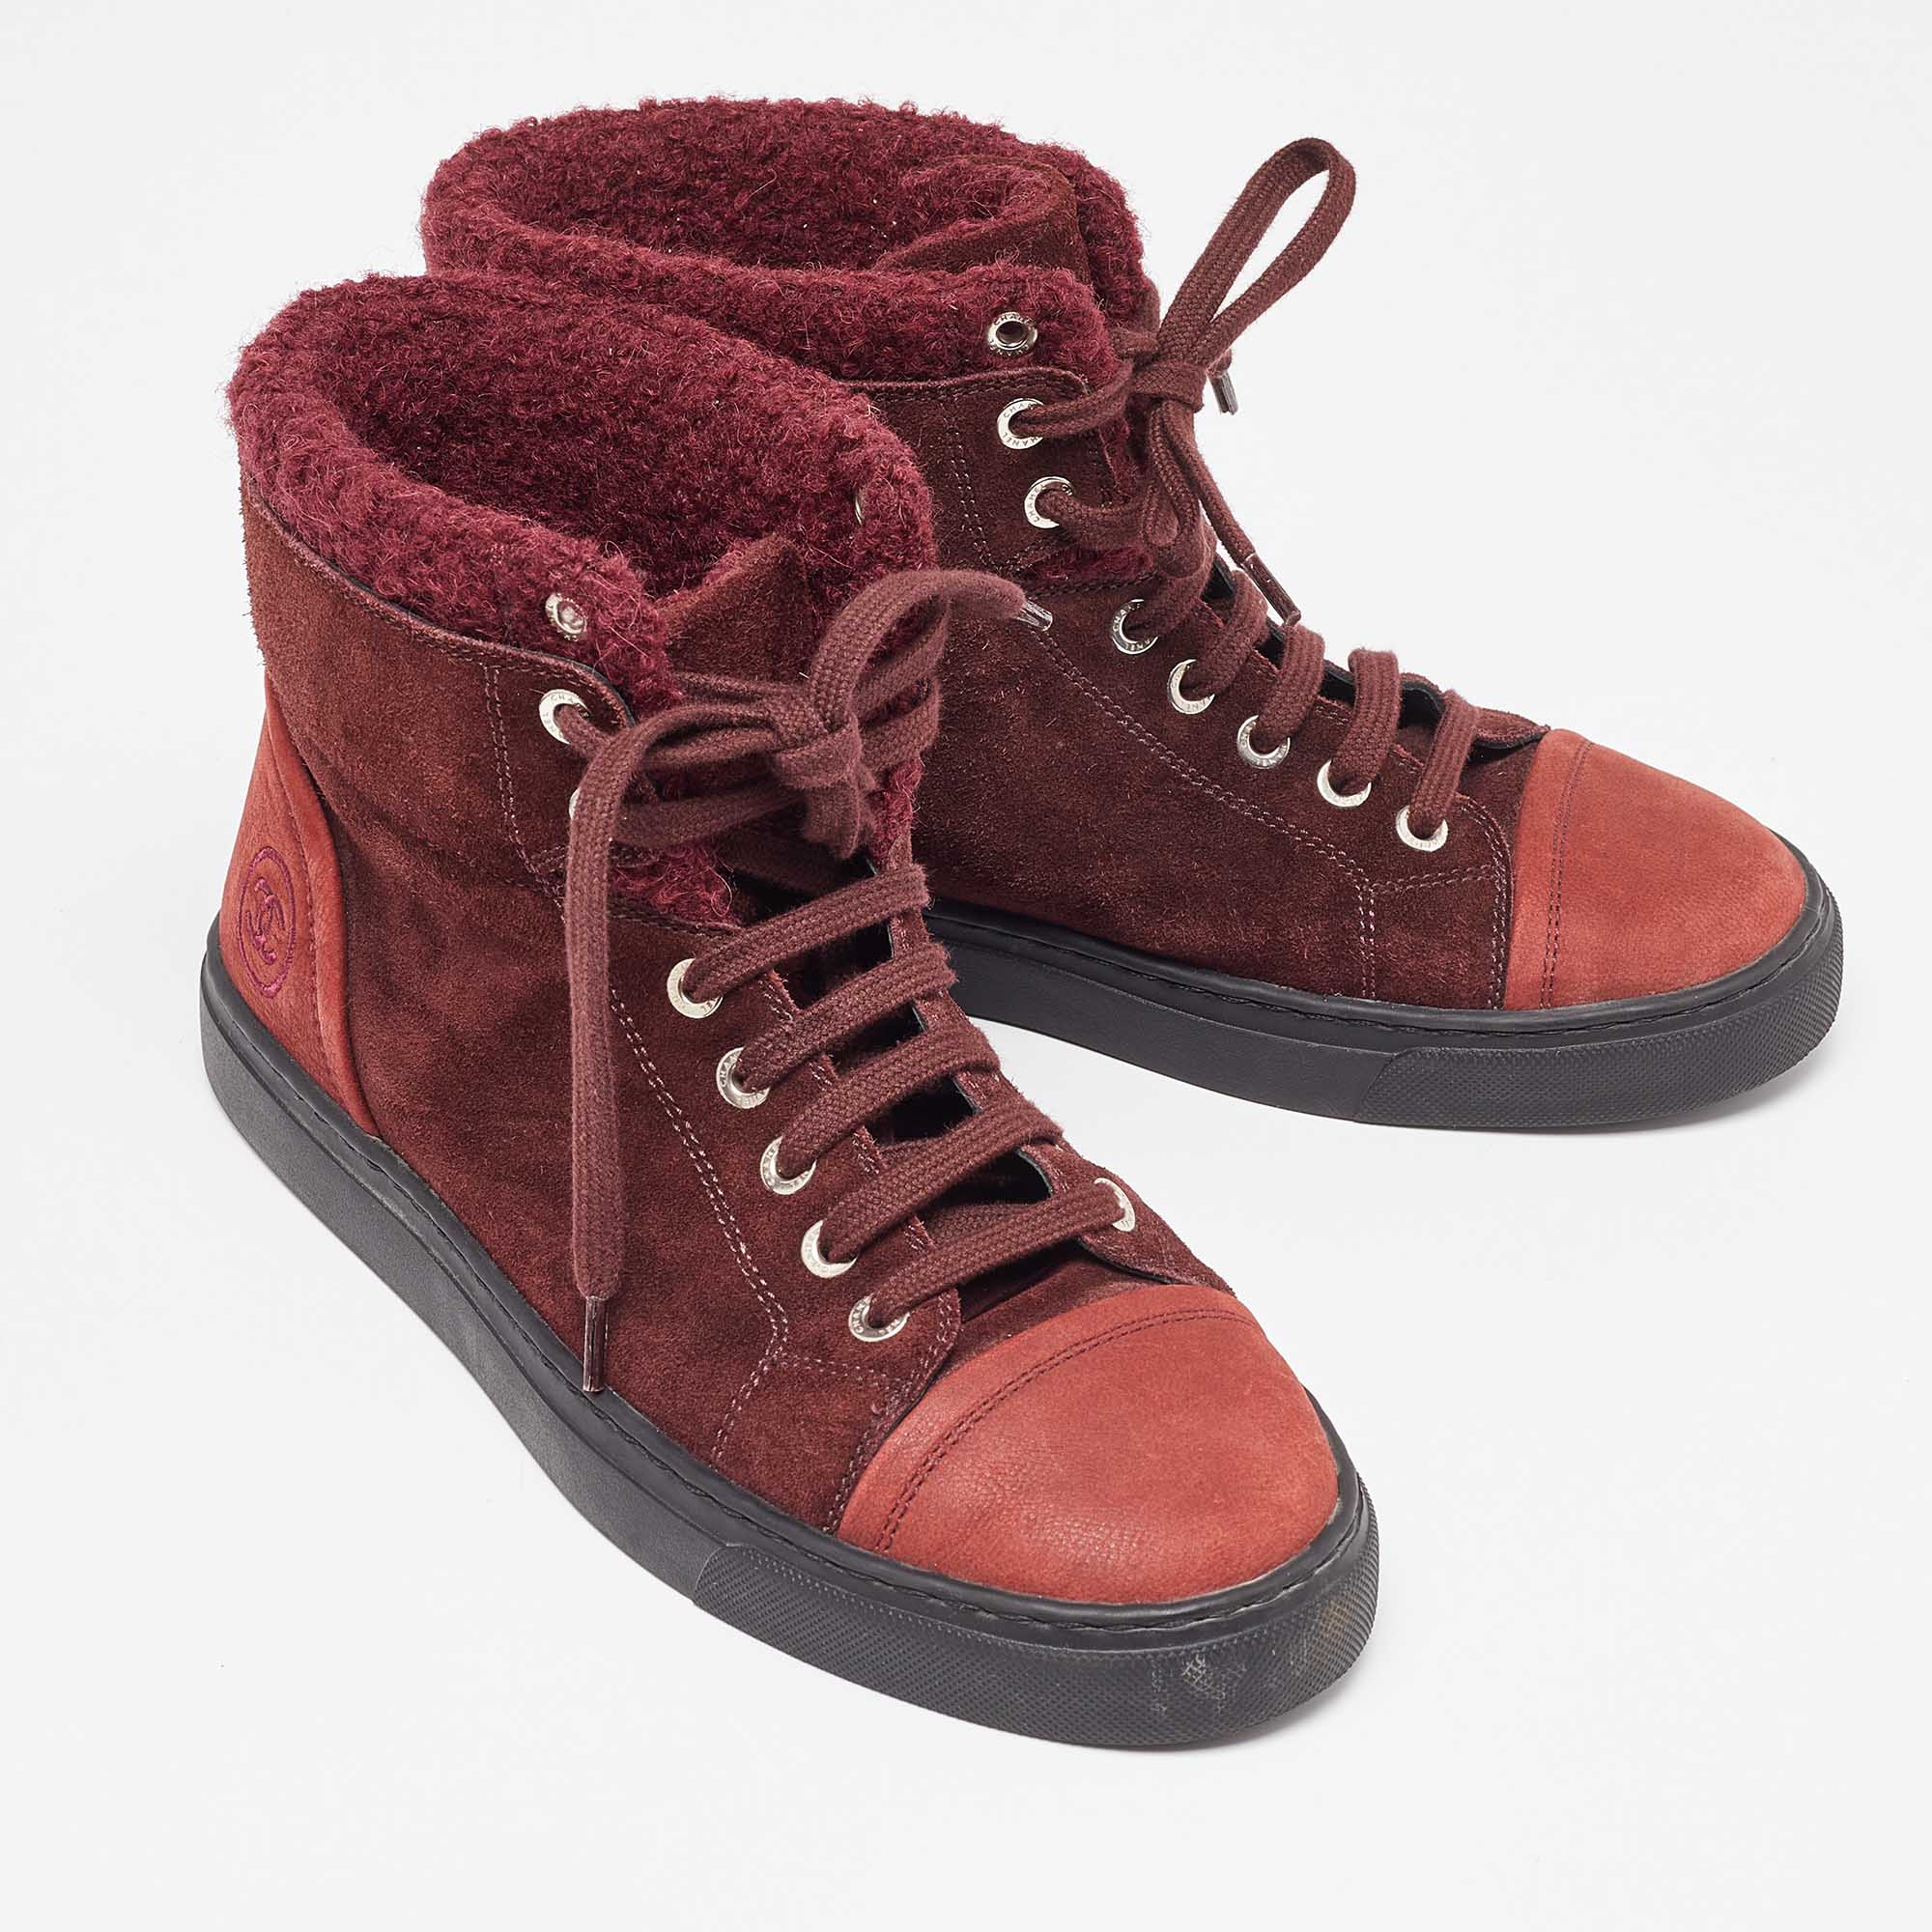 Chanel Burgundy Suede And Wool Trim CC High Top Sneakers Size 37.5